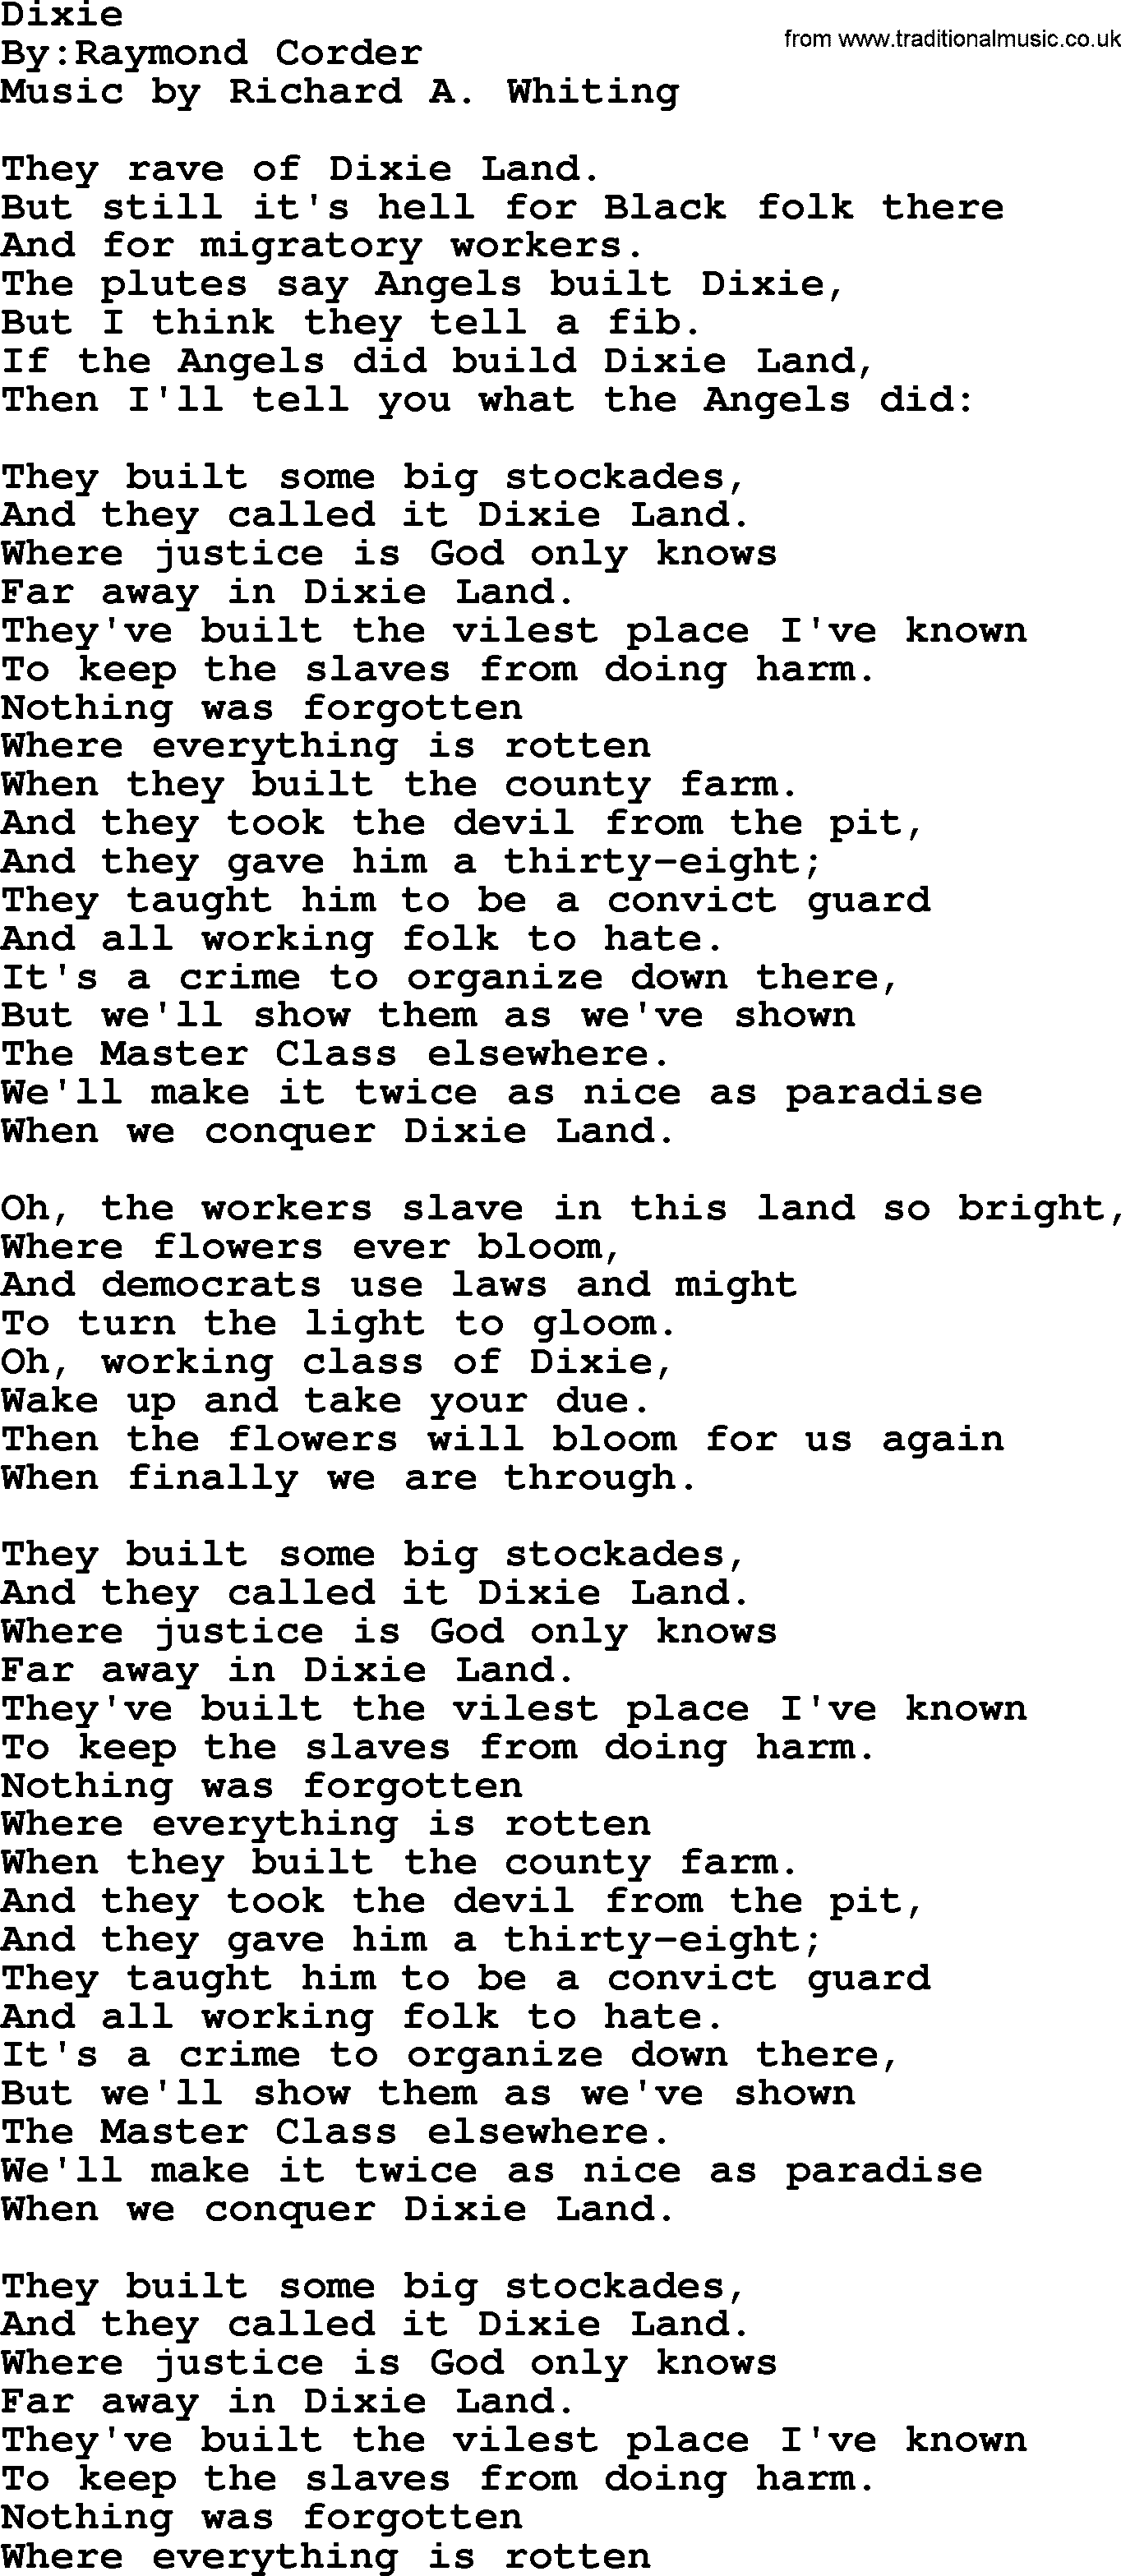 Political, Solidarity, Workers or Union song: Dixie, lyrics